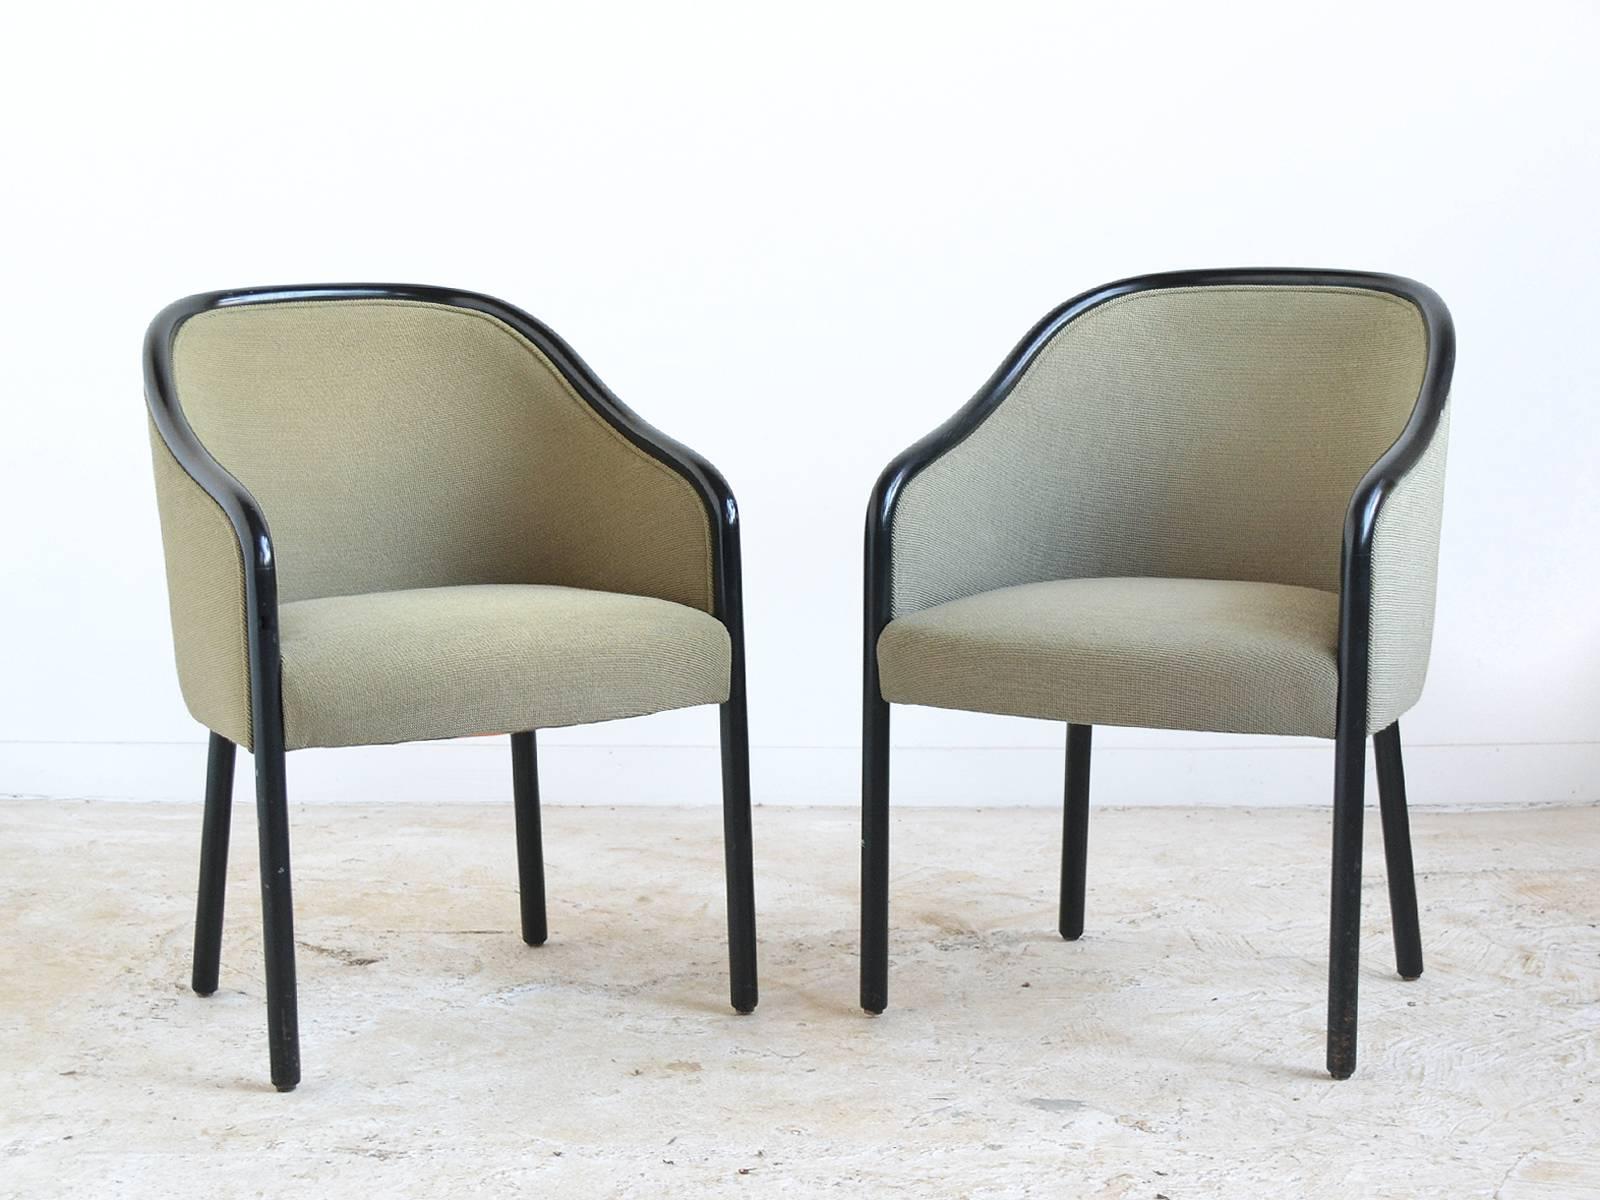 Ward Bennett's highly refined aesthetic combines subtle, graceful shapes and exquisite craftsmanship. The classical proportions of these wood framed armchairs allows them to work in any interior. The black lacquered wood legs and surround provide a